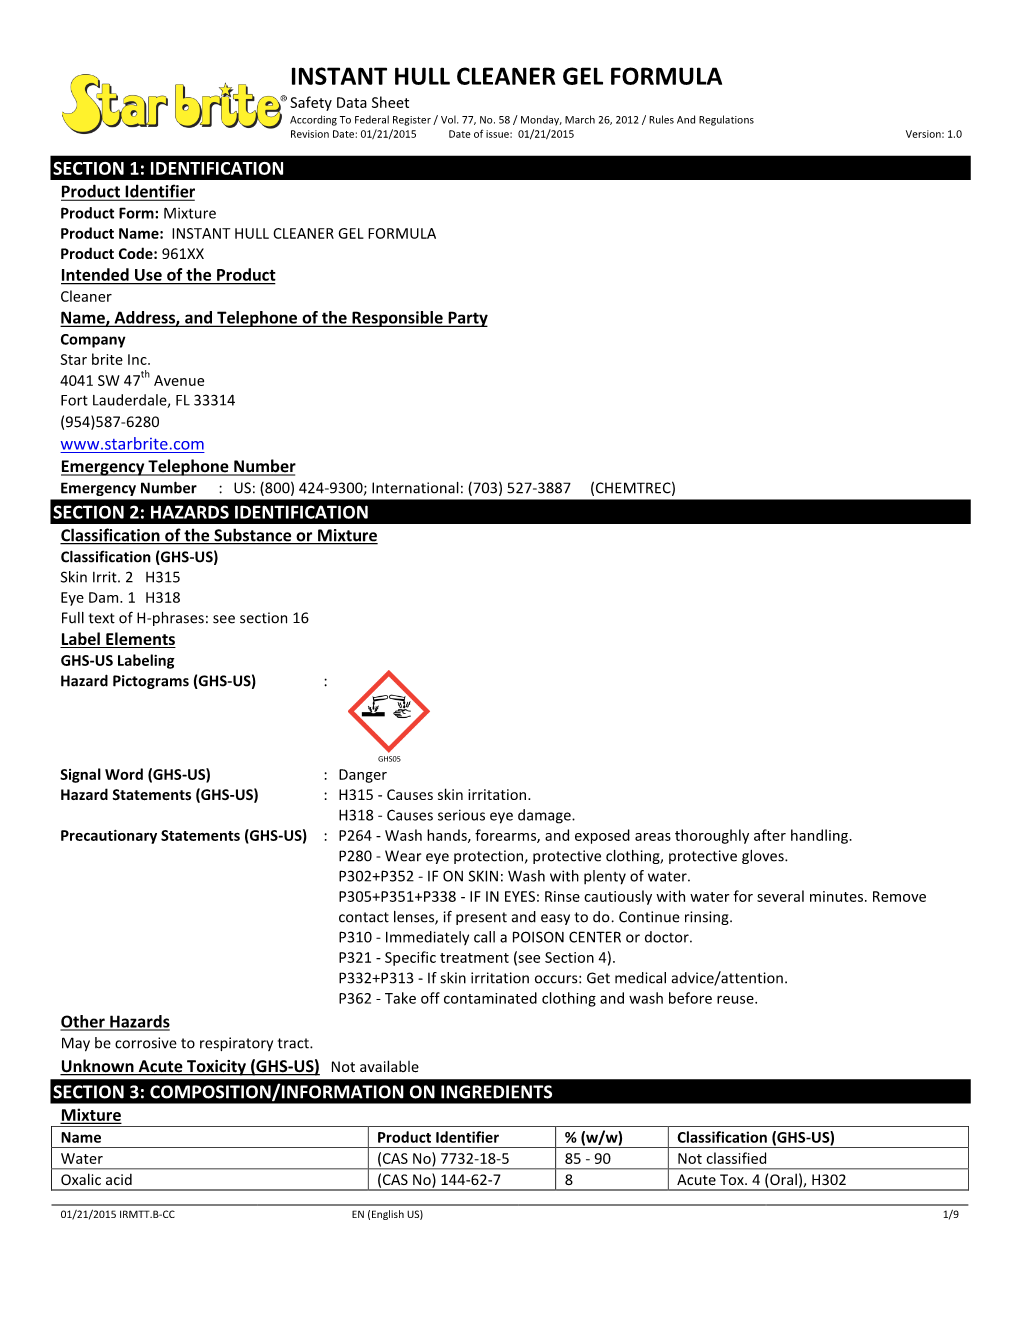 INSTANT HULL CLEANER GEL FORMULA Safety Data Sheet According to Federal Register / Vol